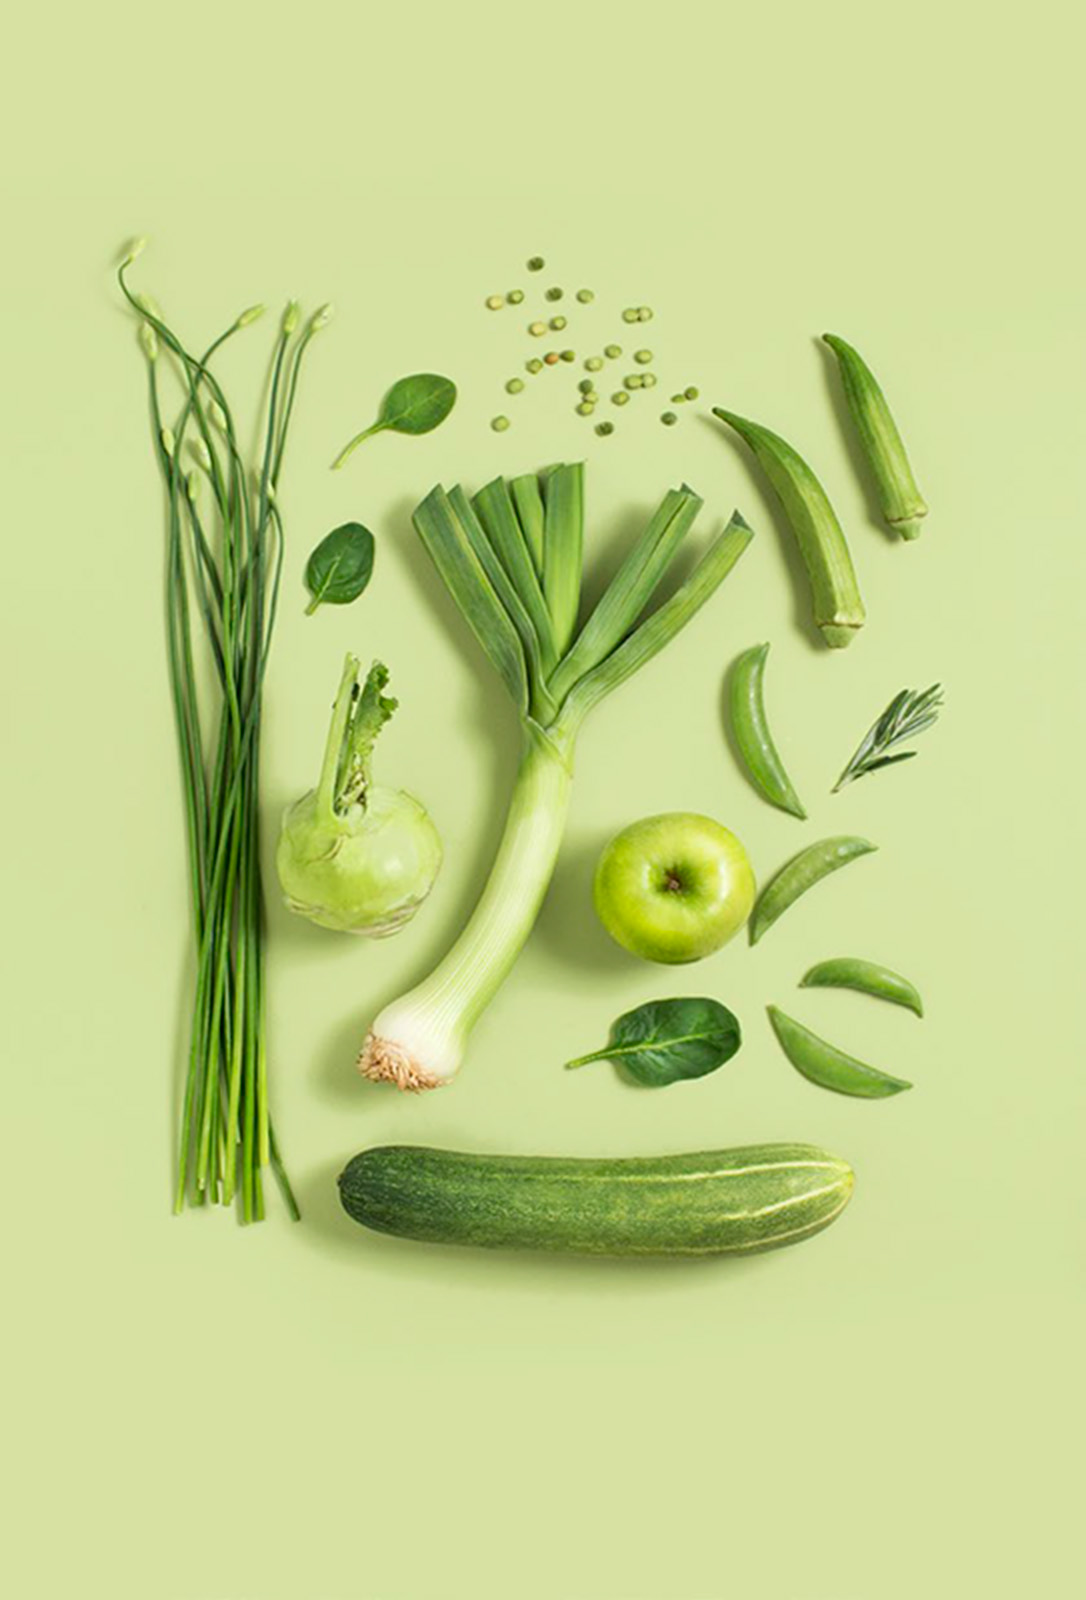 Green vegetables, fruit and herbs arranged on flat surface; scallions, leek, onion, spinach, cucumber, peas, okra, apple, rosemary and more